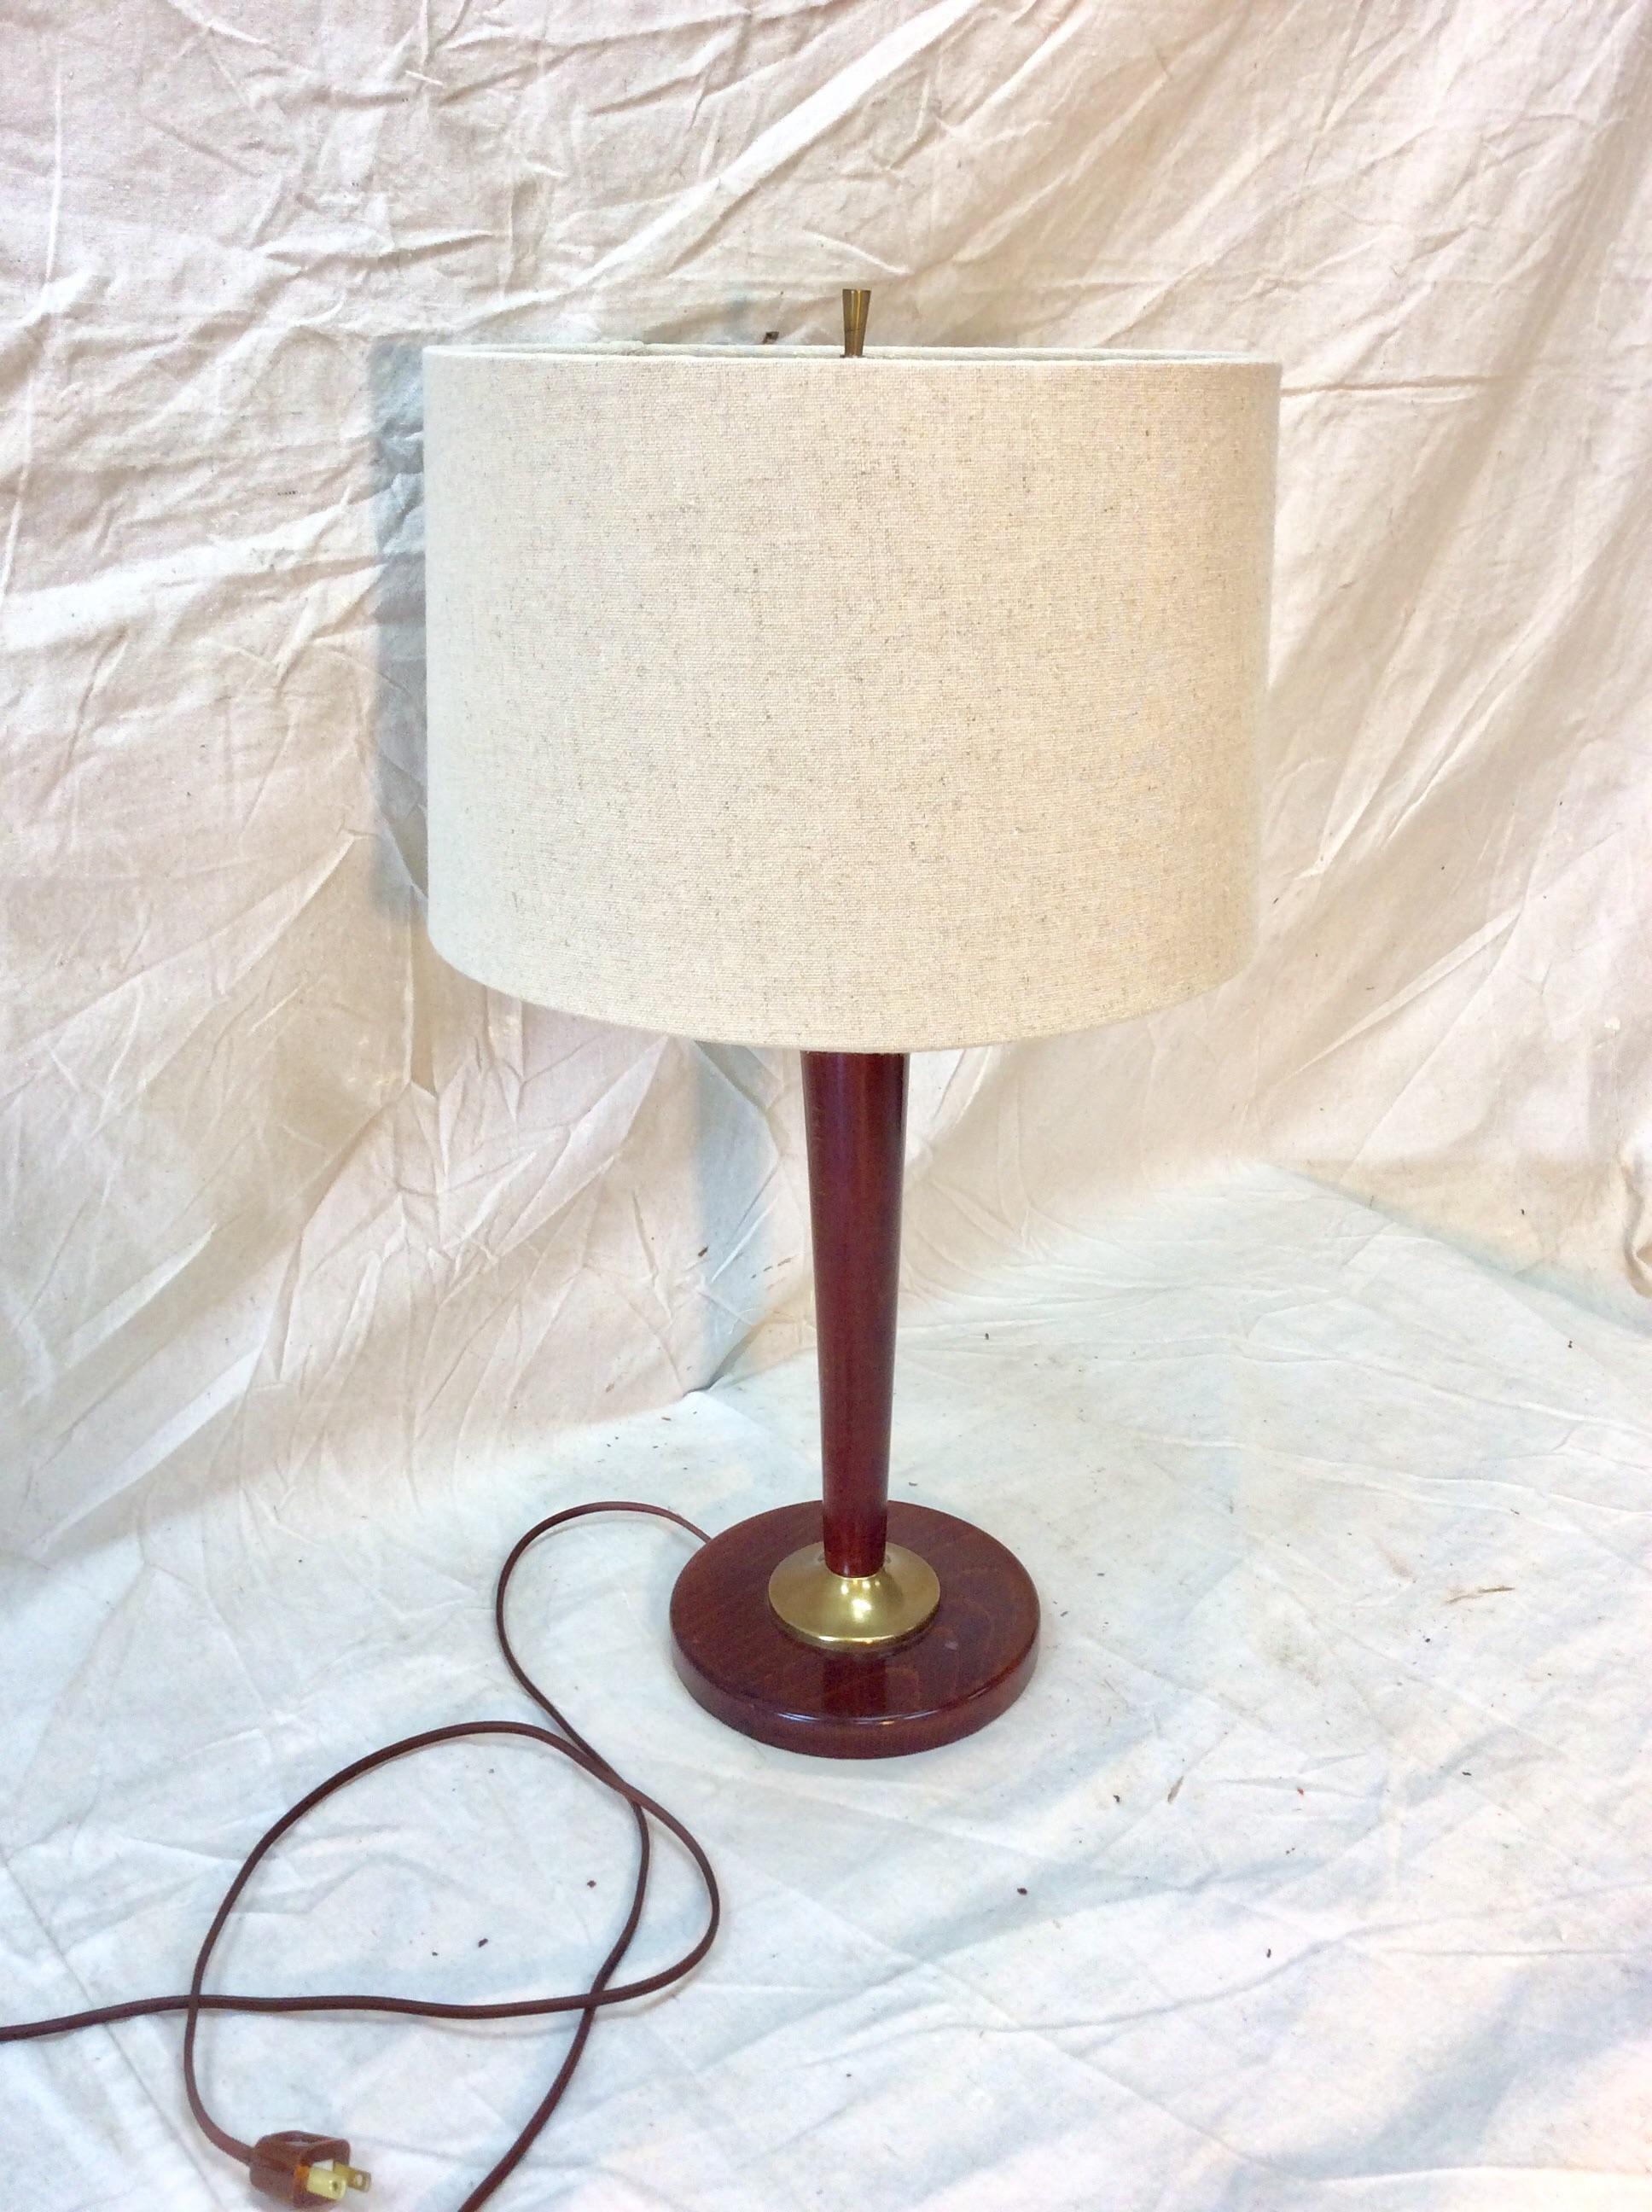 Found in the south of France this Mid-Century Modern French Wood and Brass Lamp is a great size for a table, entry piece or even a desk.  The round base is crafted with a brass center ring which is a beautiful contrast to the smooth wood. The lamp